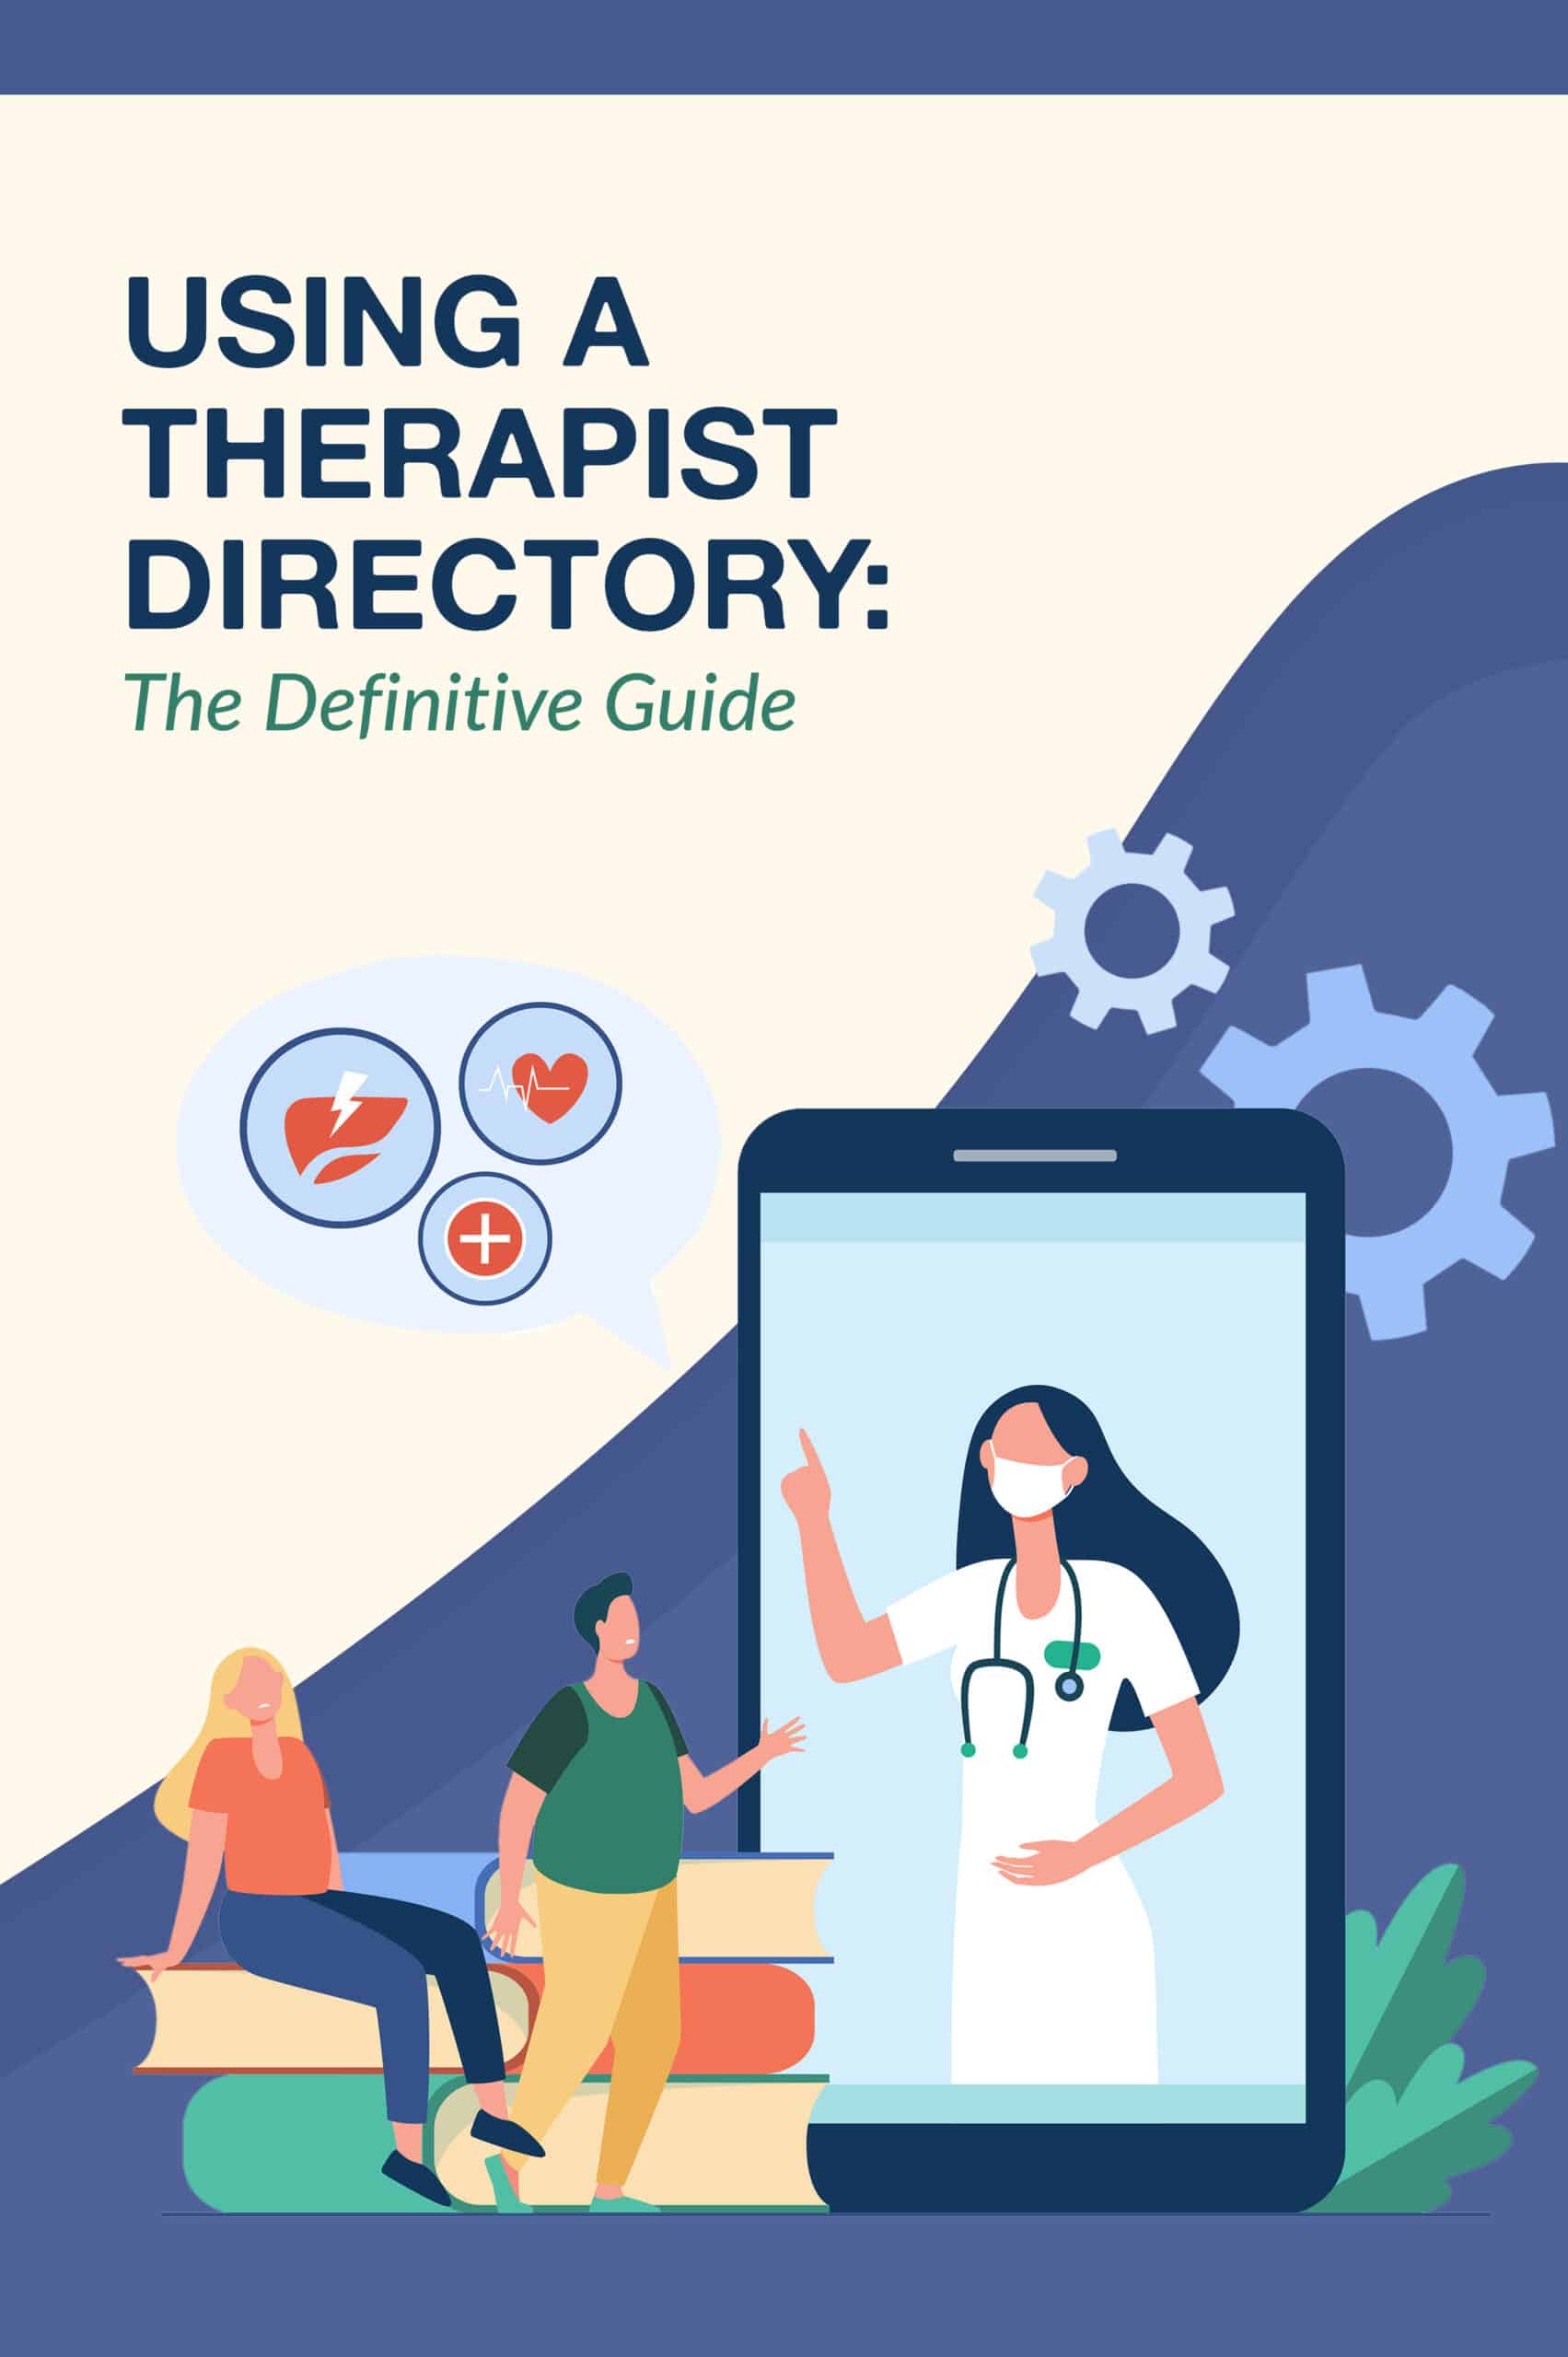 Using a Therapist Directory: The Definitive Guide